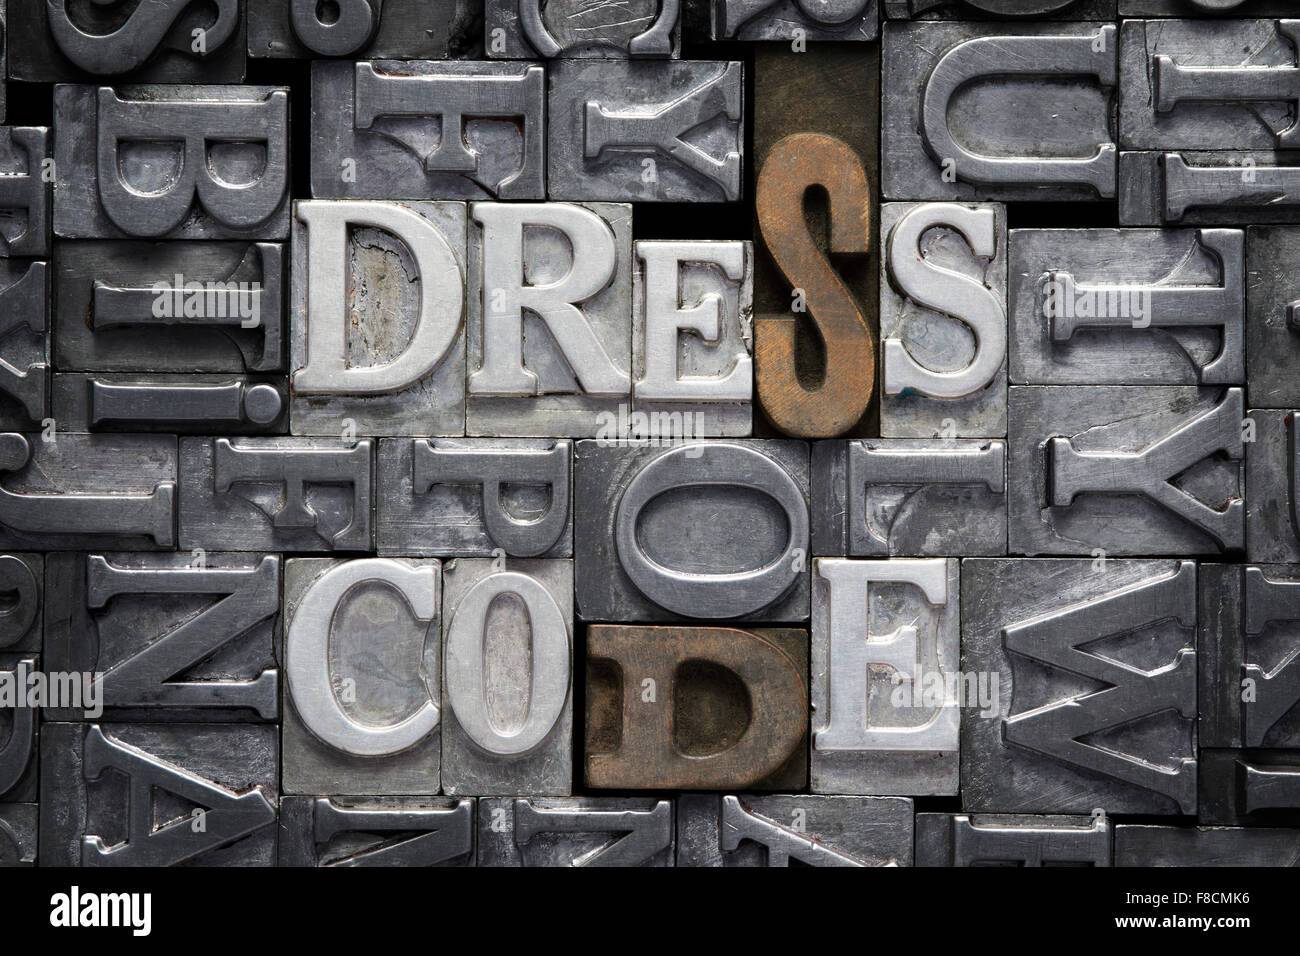 dress code phrase made from metallic letterpress type with letter blocks background Stock Photo